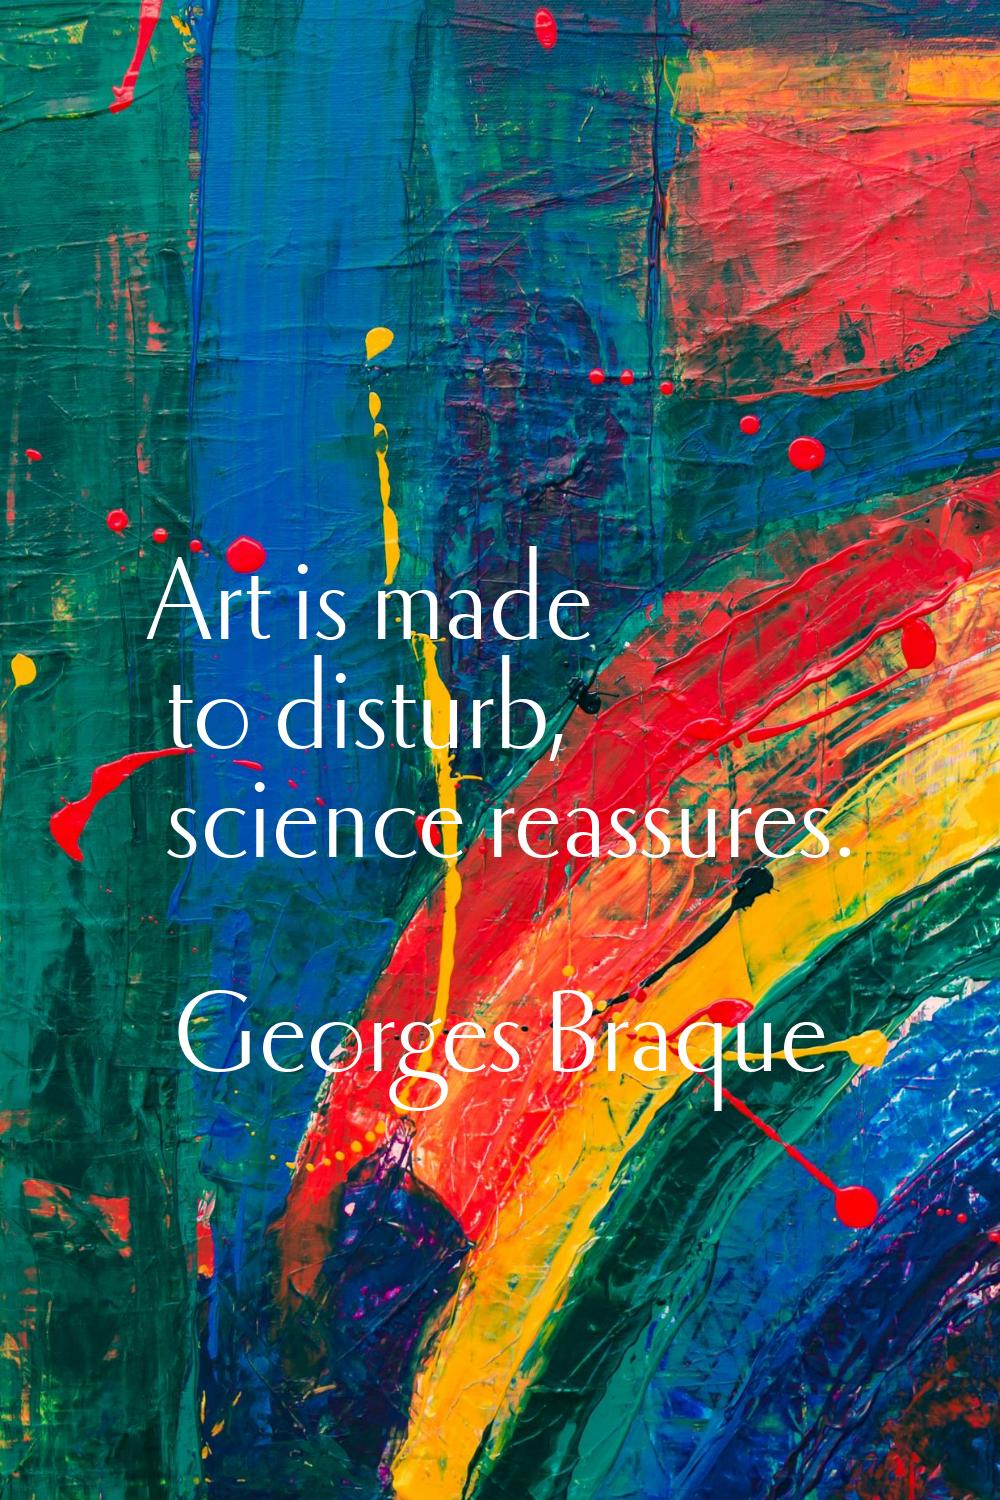 Art is made to disturb, science reassures.